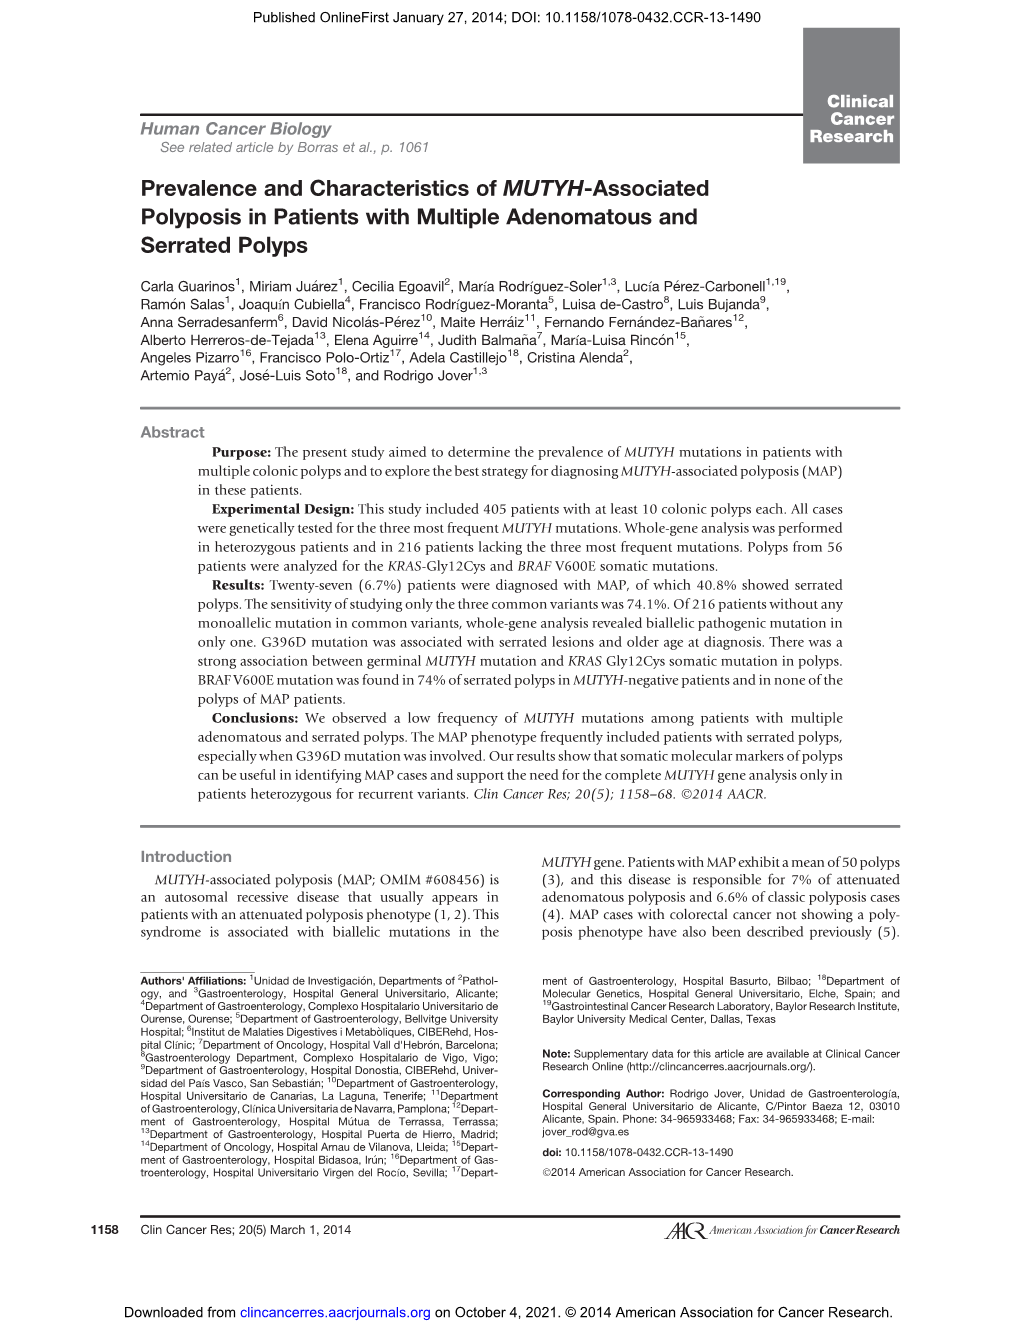 Prevalence and Characteristics of MUTYH-Associated Polyposis in Patients with Multiple Adenomatous and Serrated Polyps